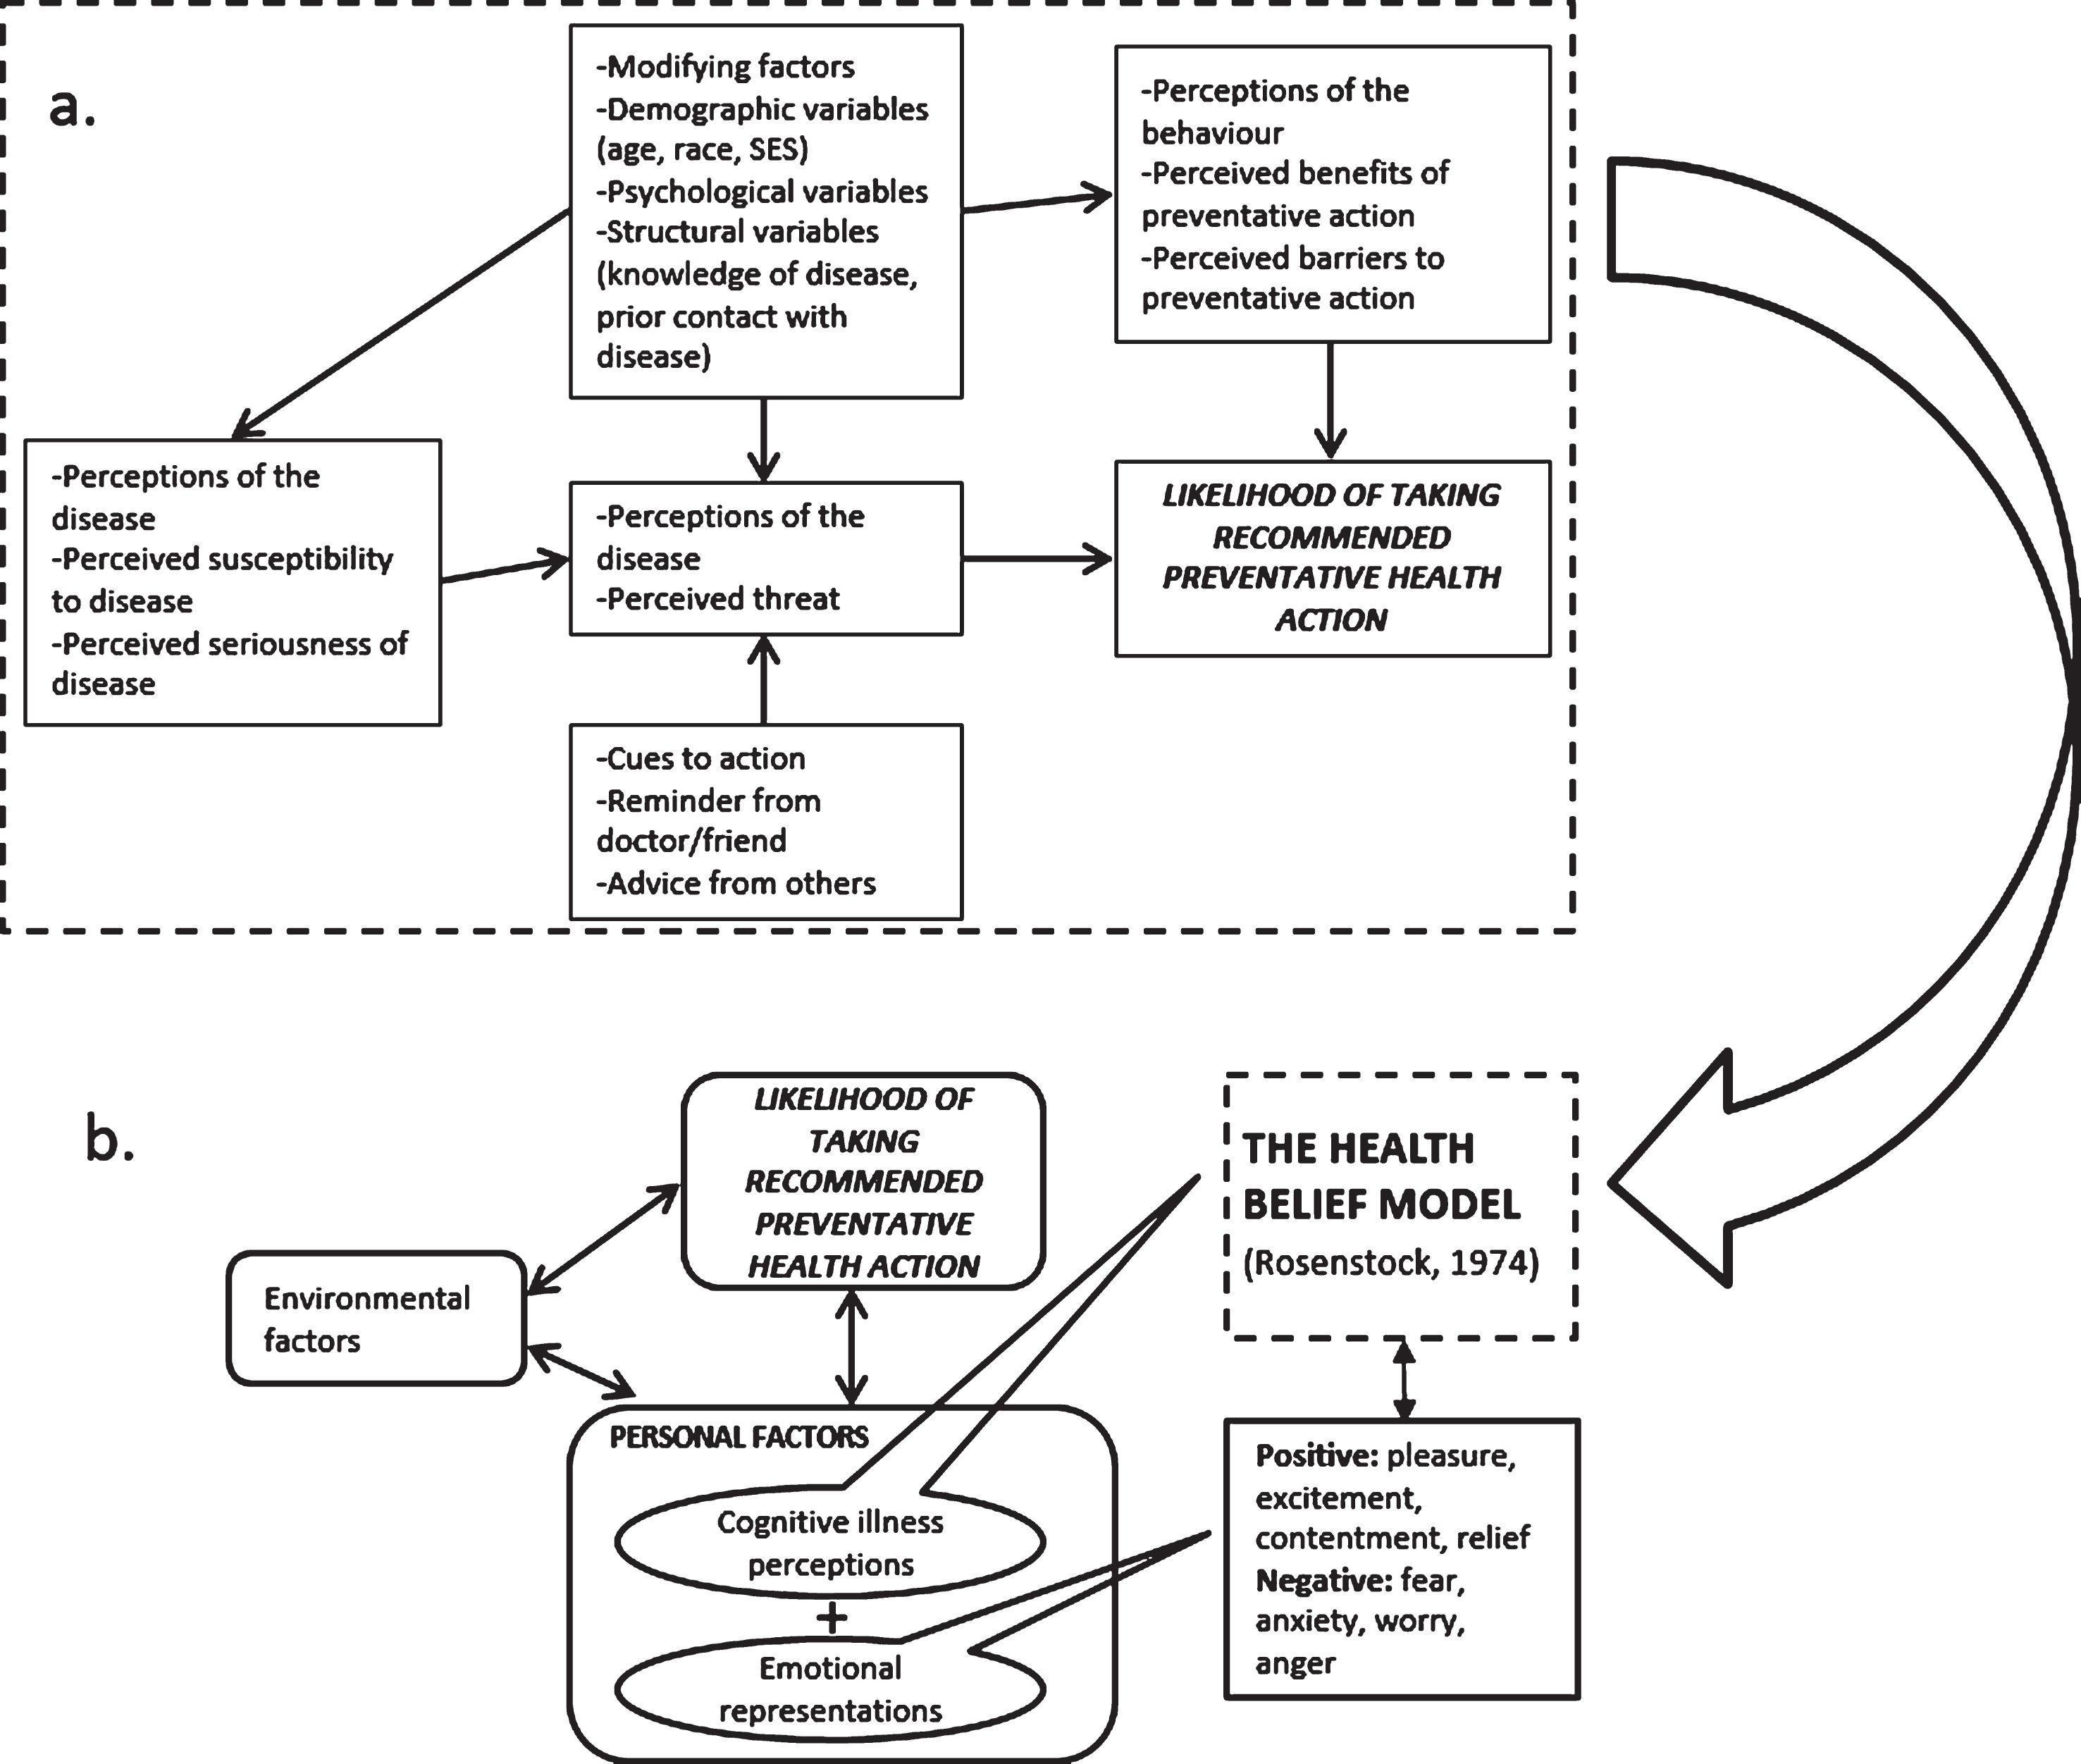 a. The Health Belief Model (Adapted from Rosenstock (1974, p. 7). b. Modified Health Belief Model (cognitive illness perceptions and emotional representation) and environmental factors (Adapted from Vedanthan et al., 2014).